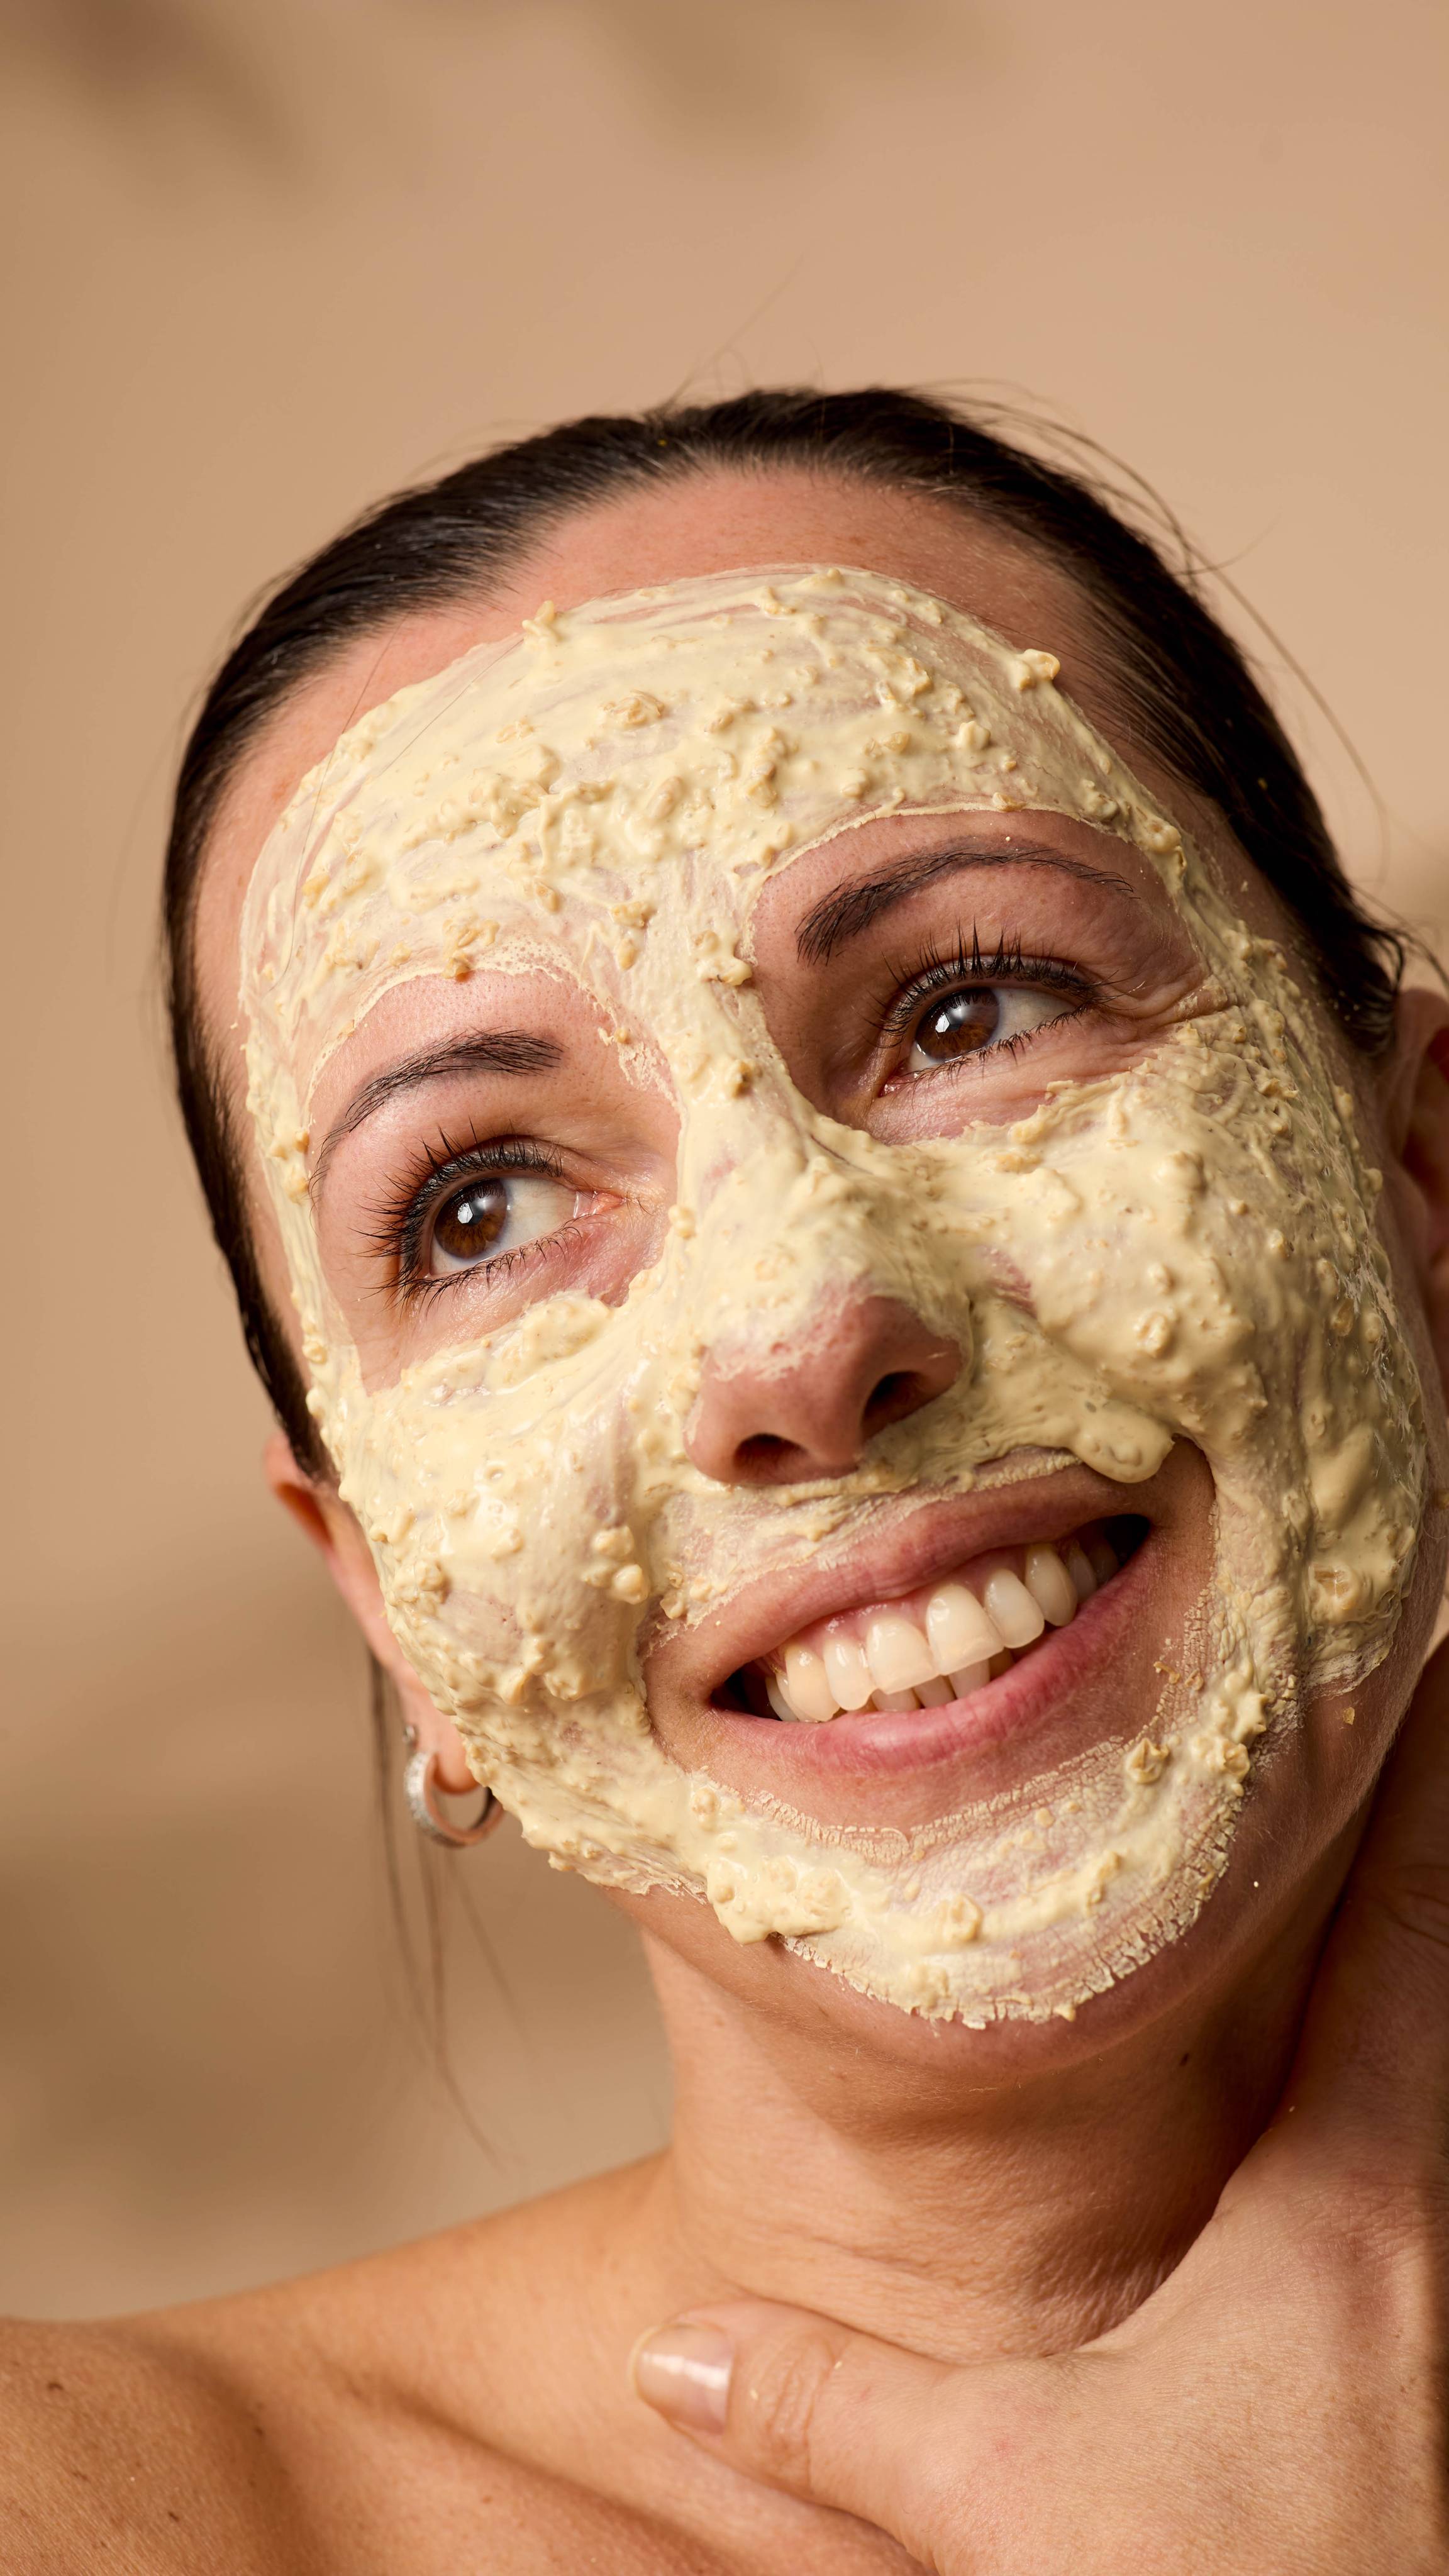 A close-up of the model's face coated in the Skin Soothing Porridge face mask with visible oats sprinkled throughout.